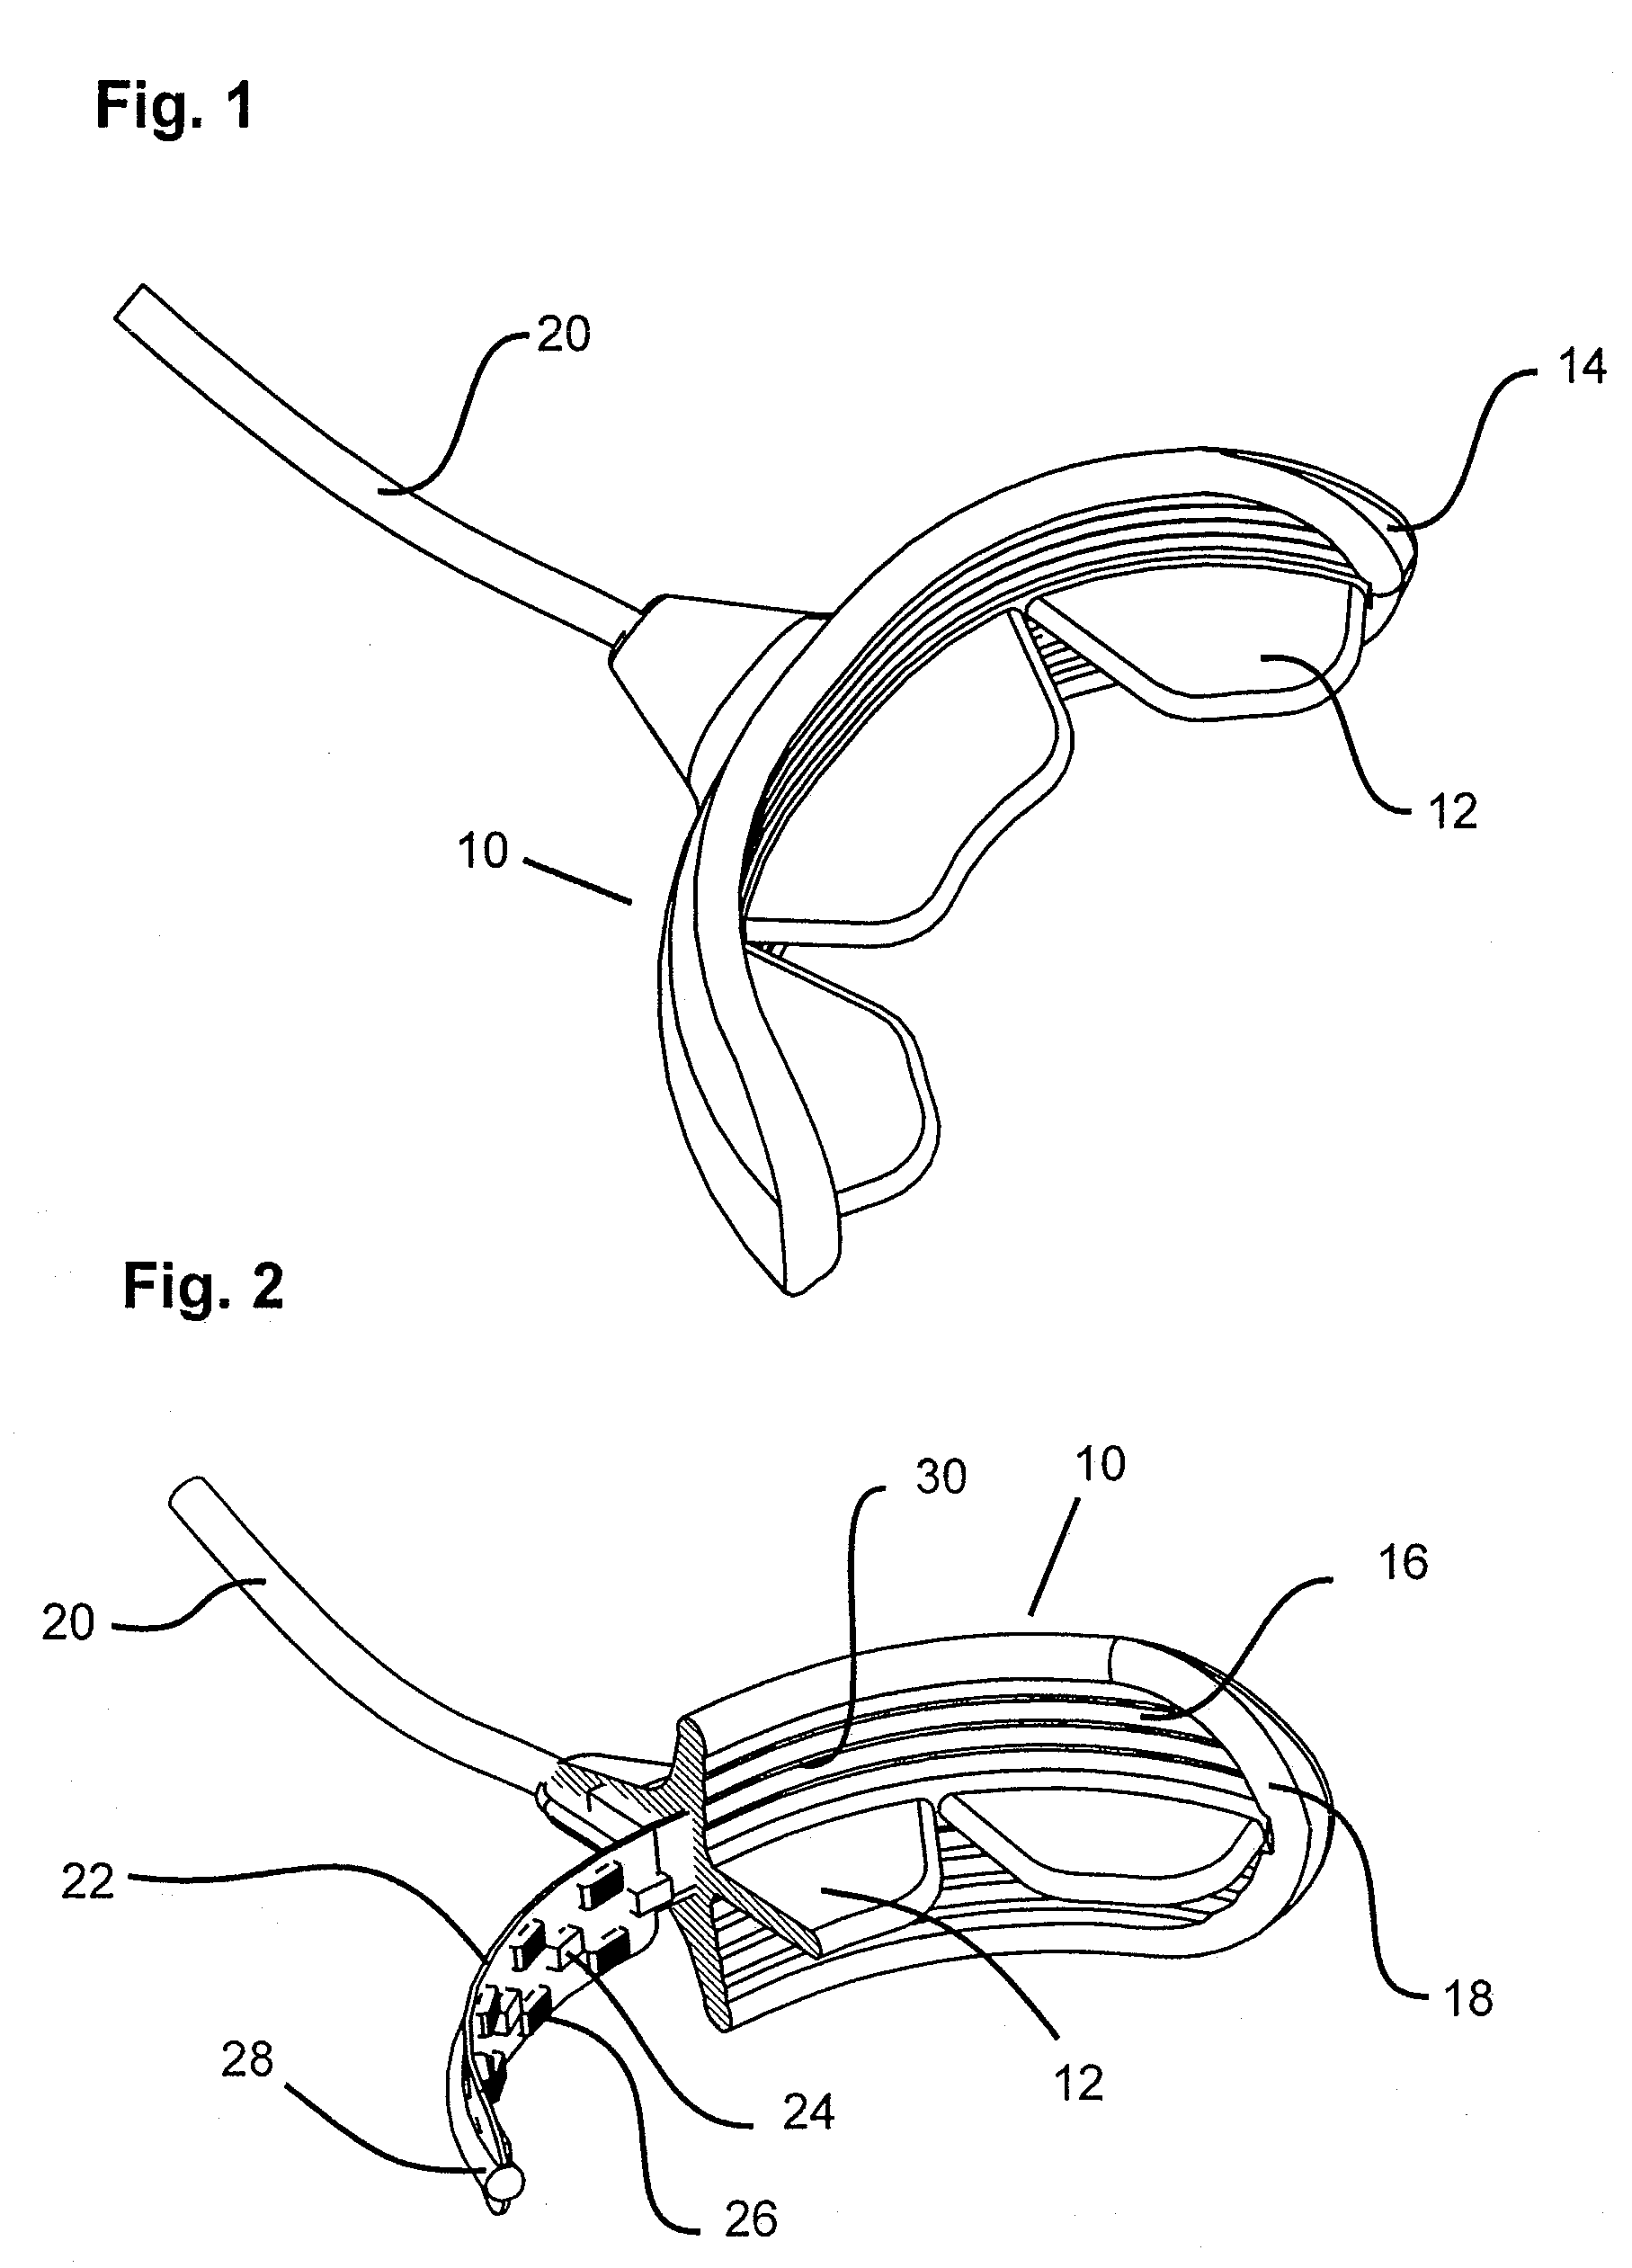 Mouthpiece that adjusts to user arch sizes and seals from oxygen exposure and methods for effecting an oral treatment